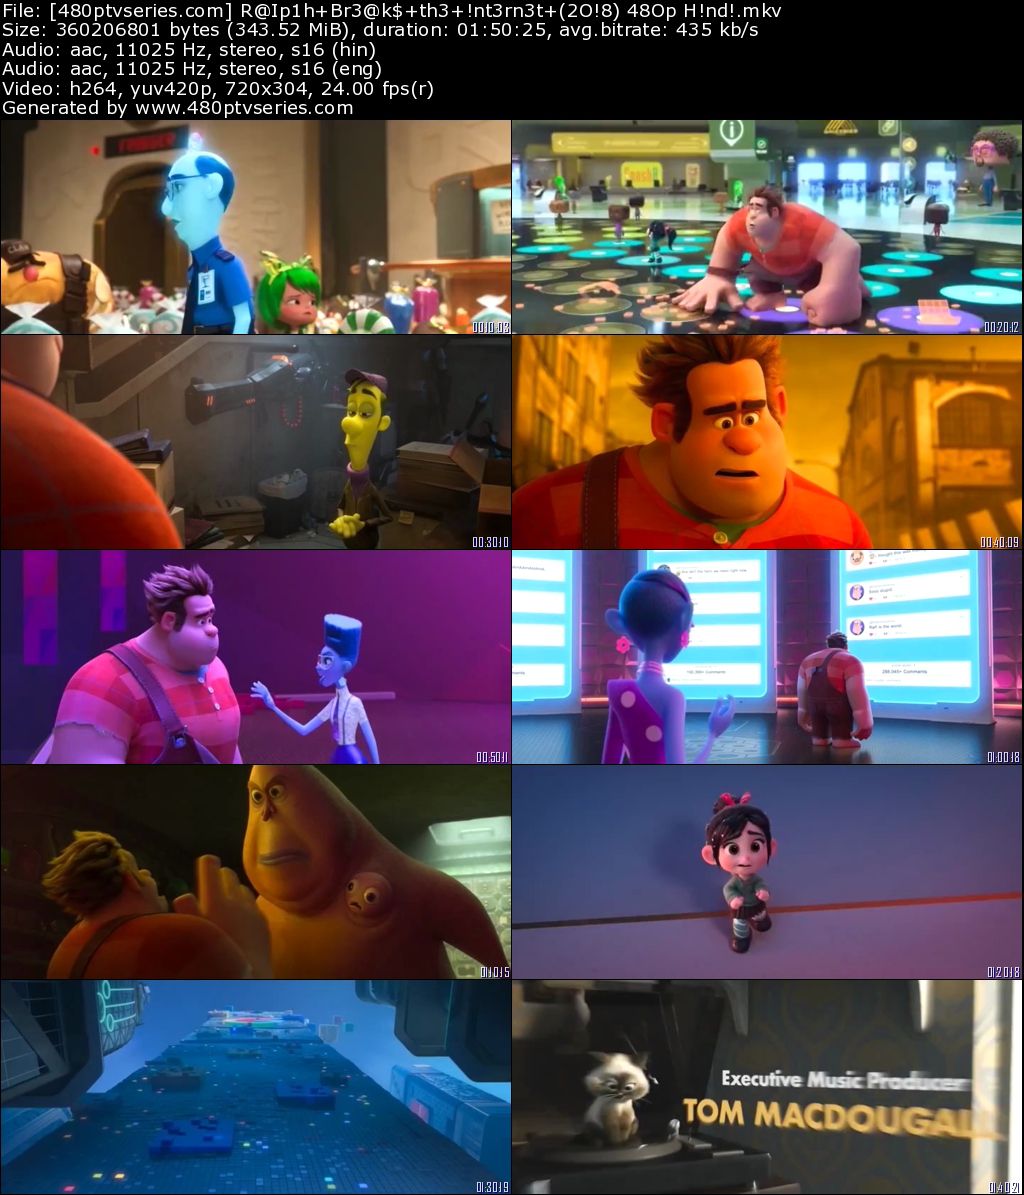 Ralph Breaks the Internet (2018) 300MB Full Hindi Dual Audio Movie Download 480p DVDScr Free Watch Online Full Movie Download Worldfree4u 9xmovies